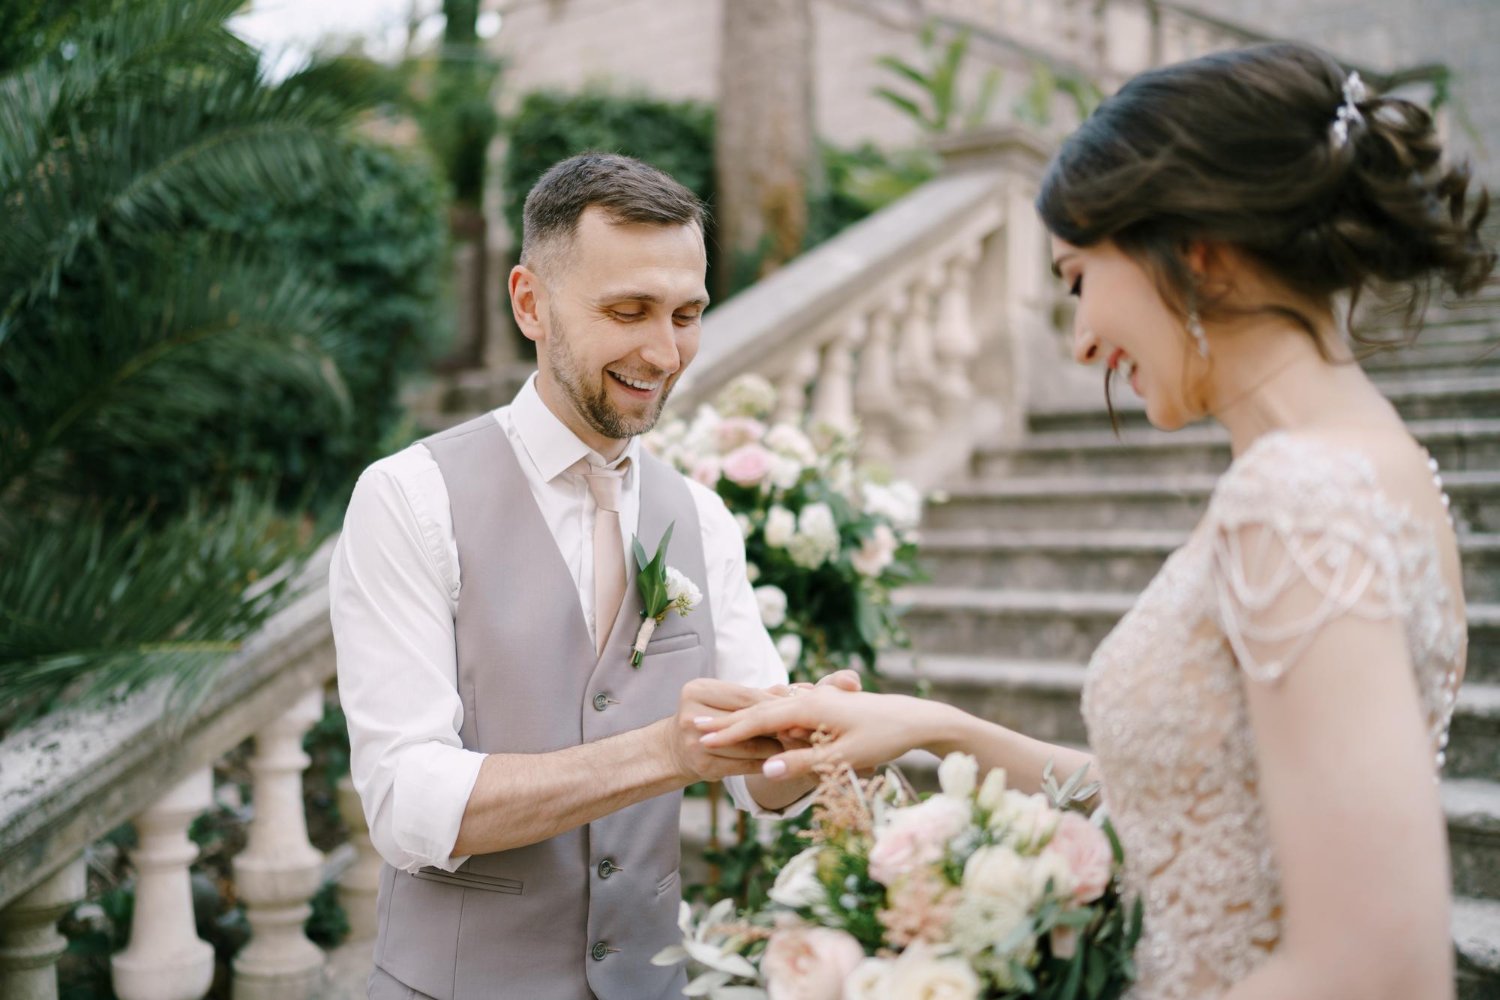 Smiling groom puts the ring on the bride finger while standing on the steps